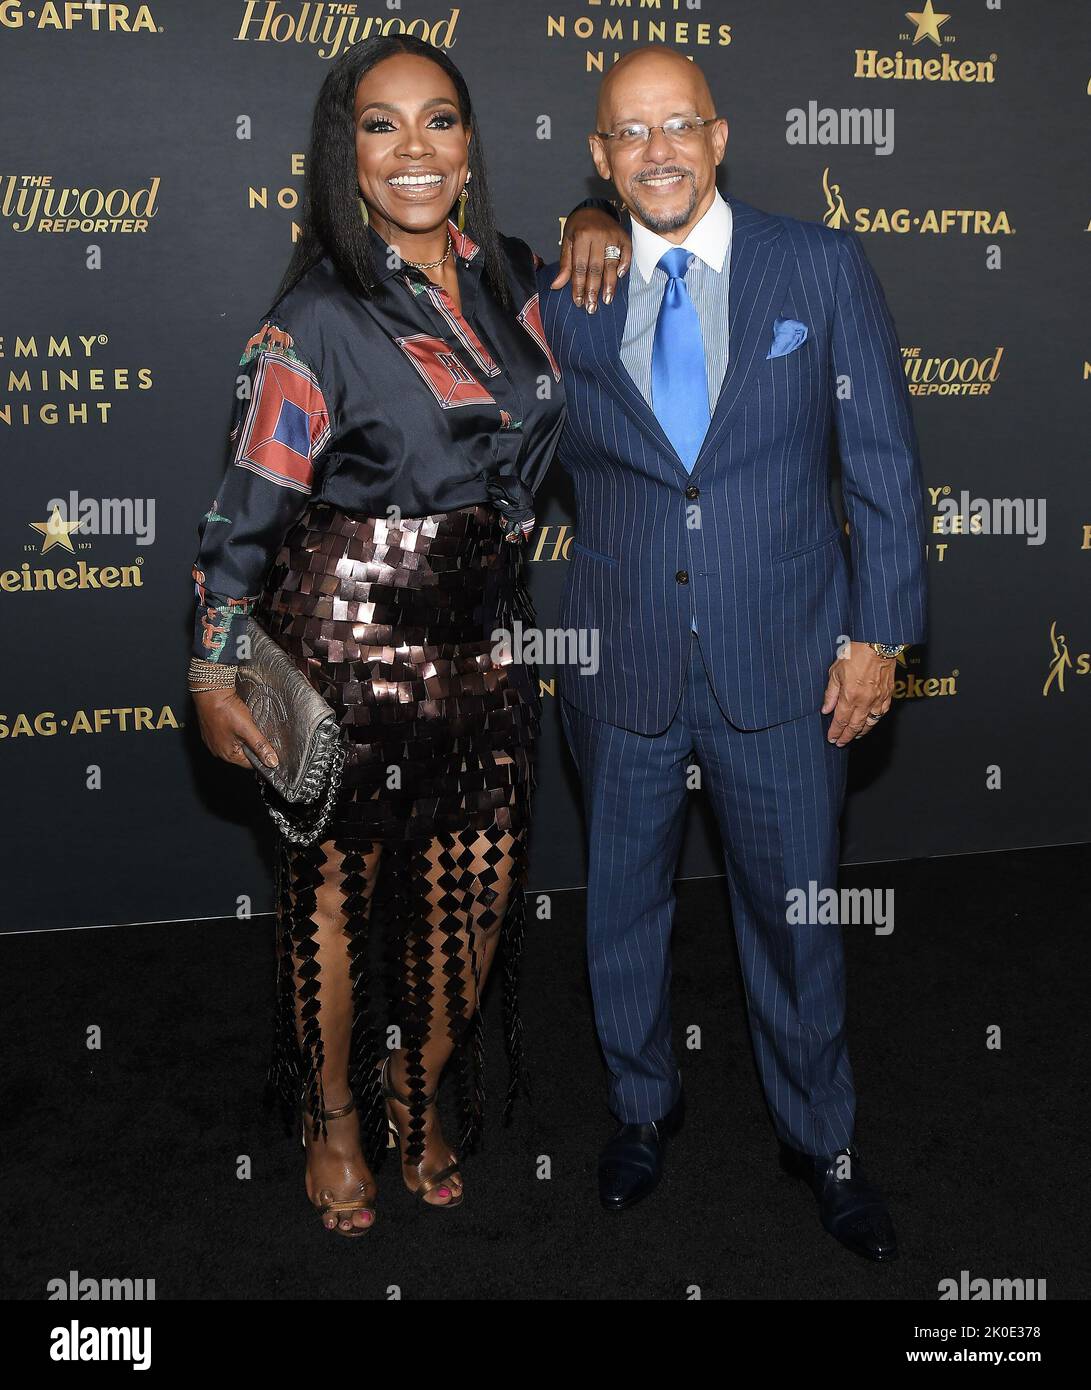 Los Angeles, USA. 10th Sep, 2022. (L-R) Sheryl Lee Ralph and Vincent J. Hughes at The Hollywood Reporter and SAG-AFTRA's EMMY NOMINEES NIGHT held at the Penthouse at 8899 Beverly in West Hollywood, CA on Saturday, September 10, 2022. (Photo By Sthanlee B. Mirador/Sipa USA) Credit: Sipa USA/Alamy Live News Stock Photo